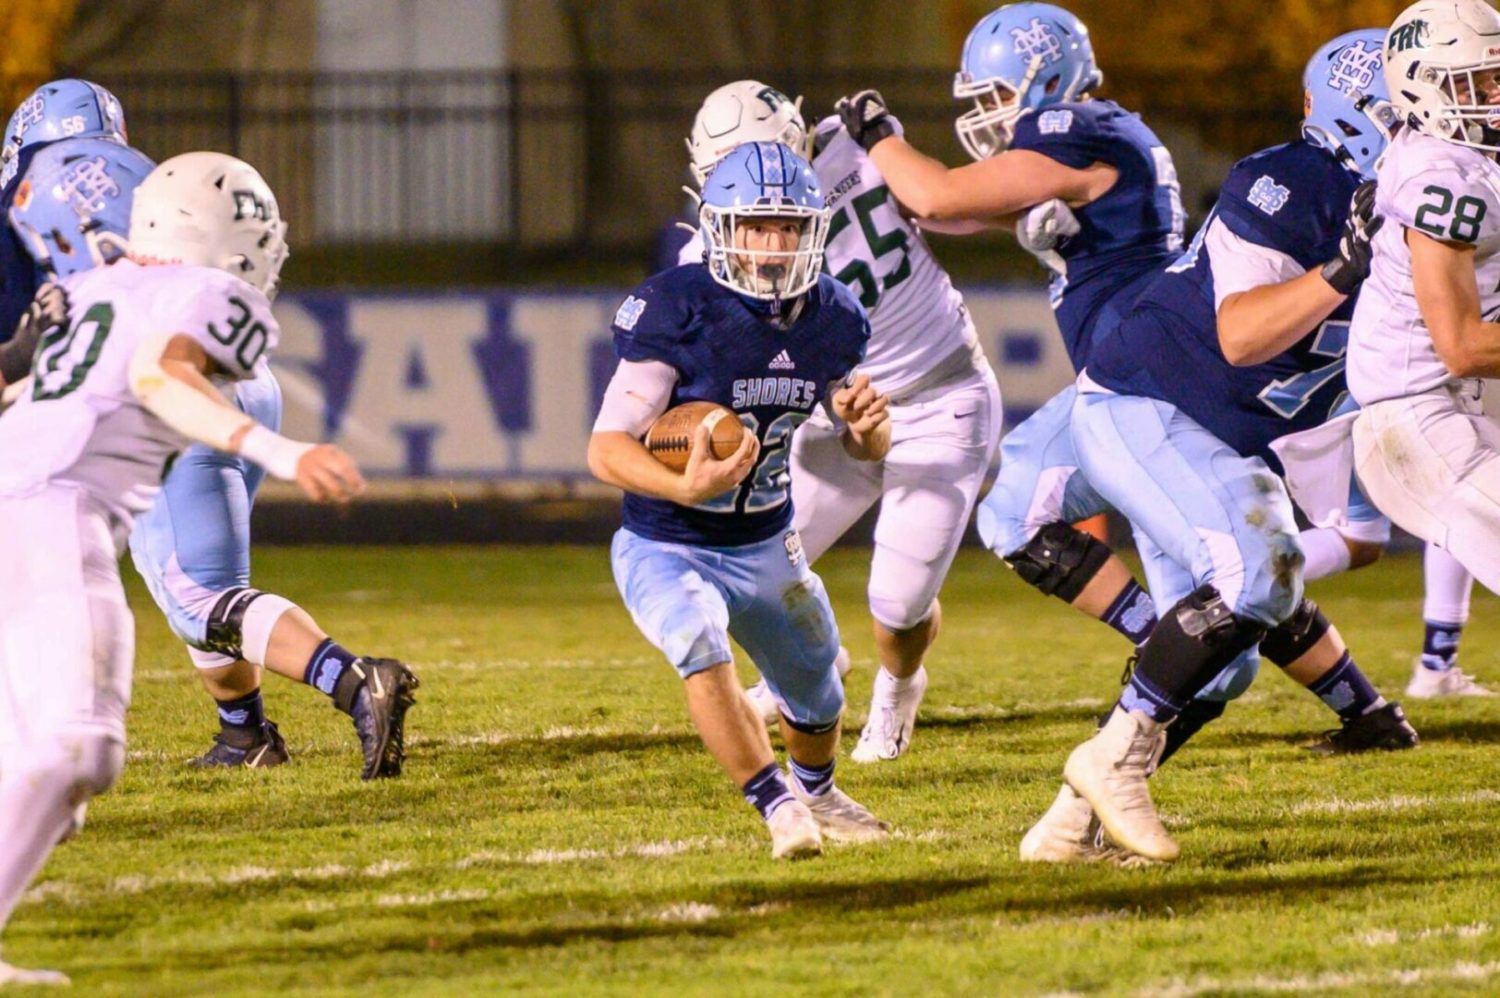 Mona Shores escapes with a 28-25 win over FH Central with a last-second, game-saving tackle at the one